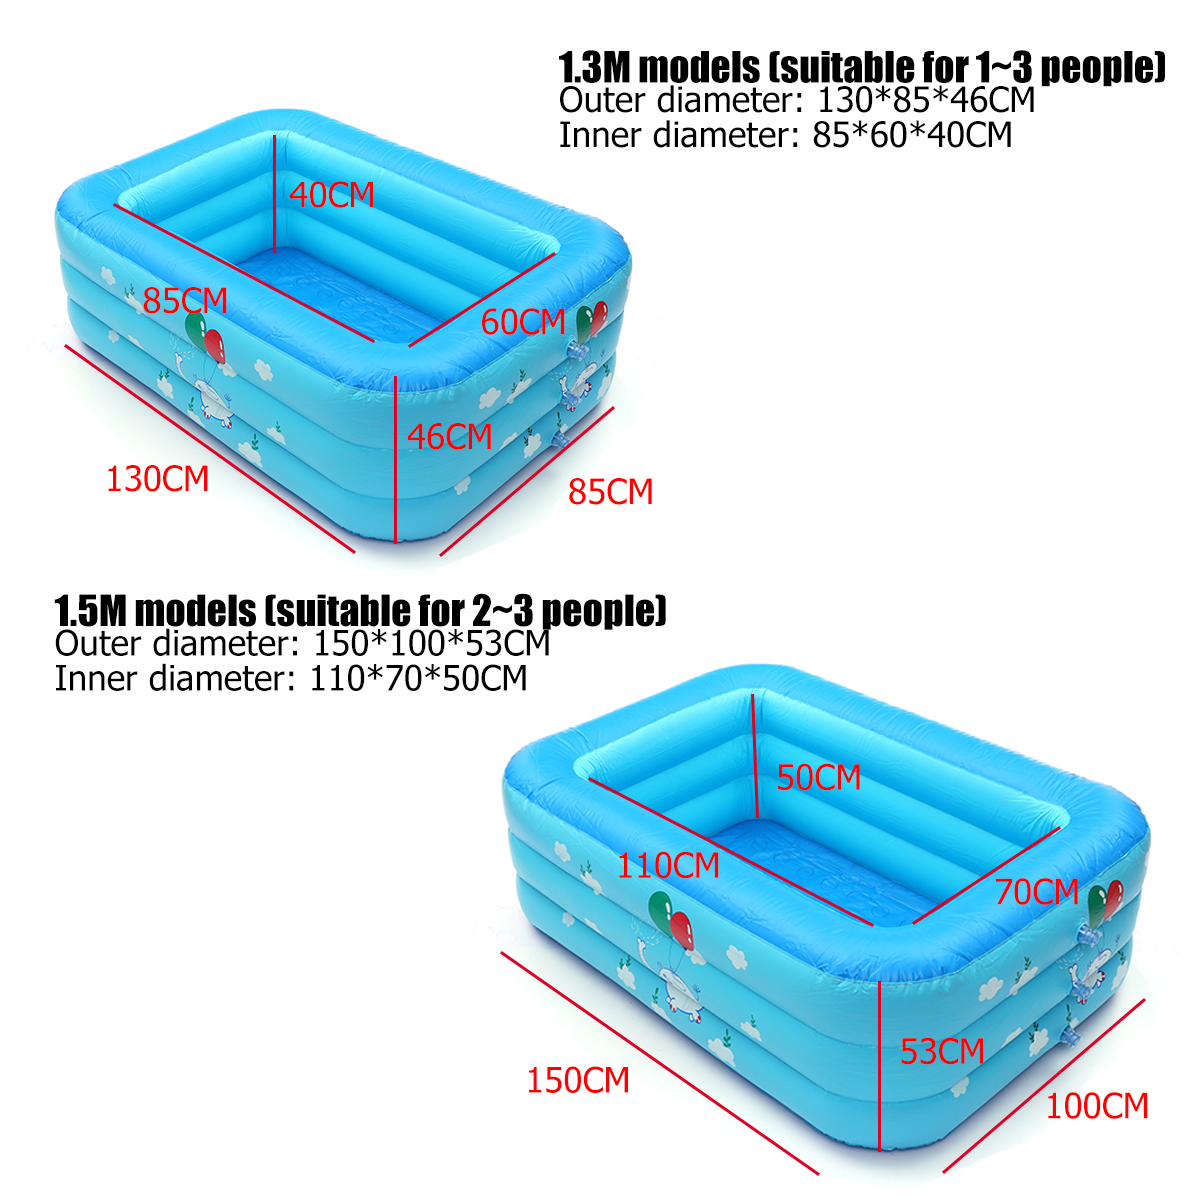 130CM150CM-Inflatable-Swimming-Pool-Outdoor-Summer-Family-Bathing-Pool-Kids-Fun-Play-Water-Pool-1571405-6